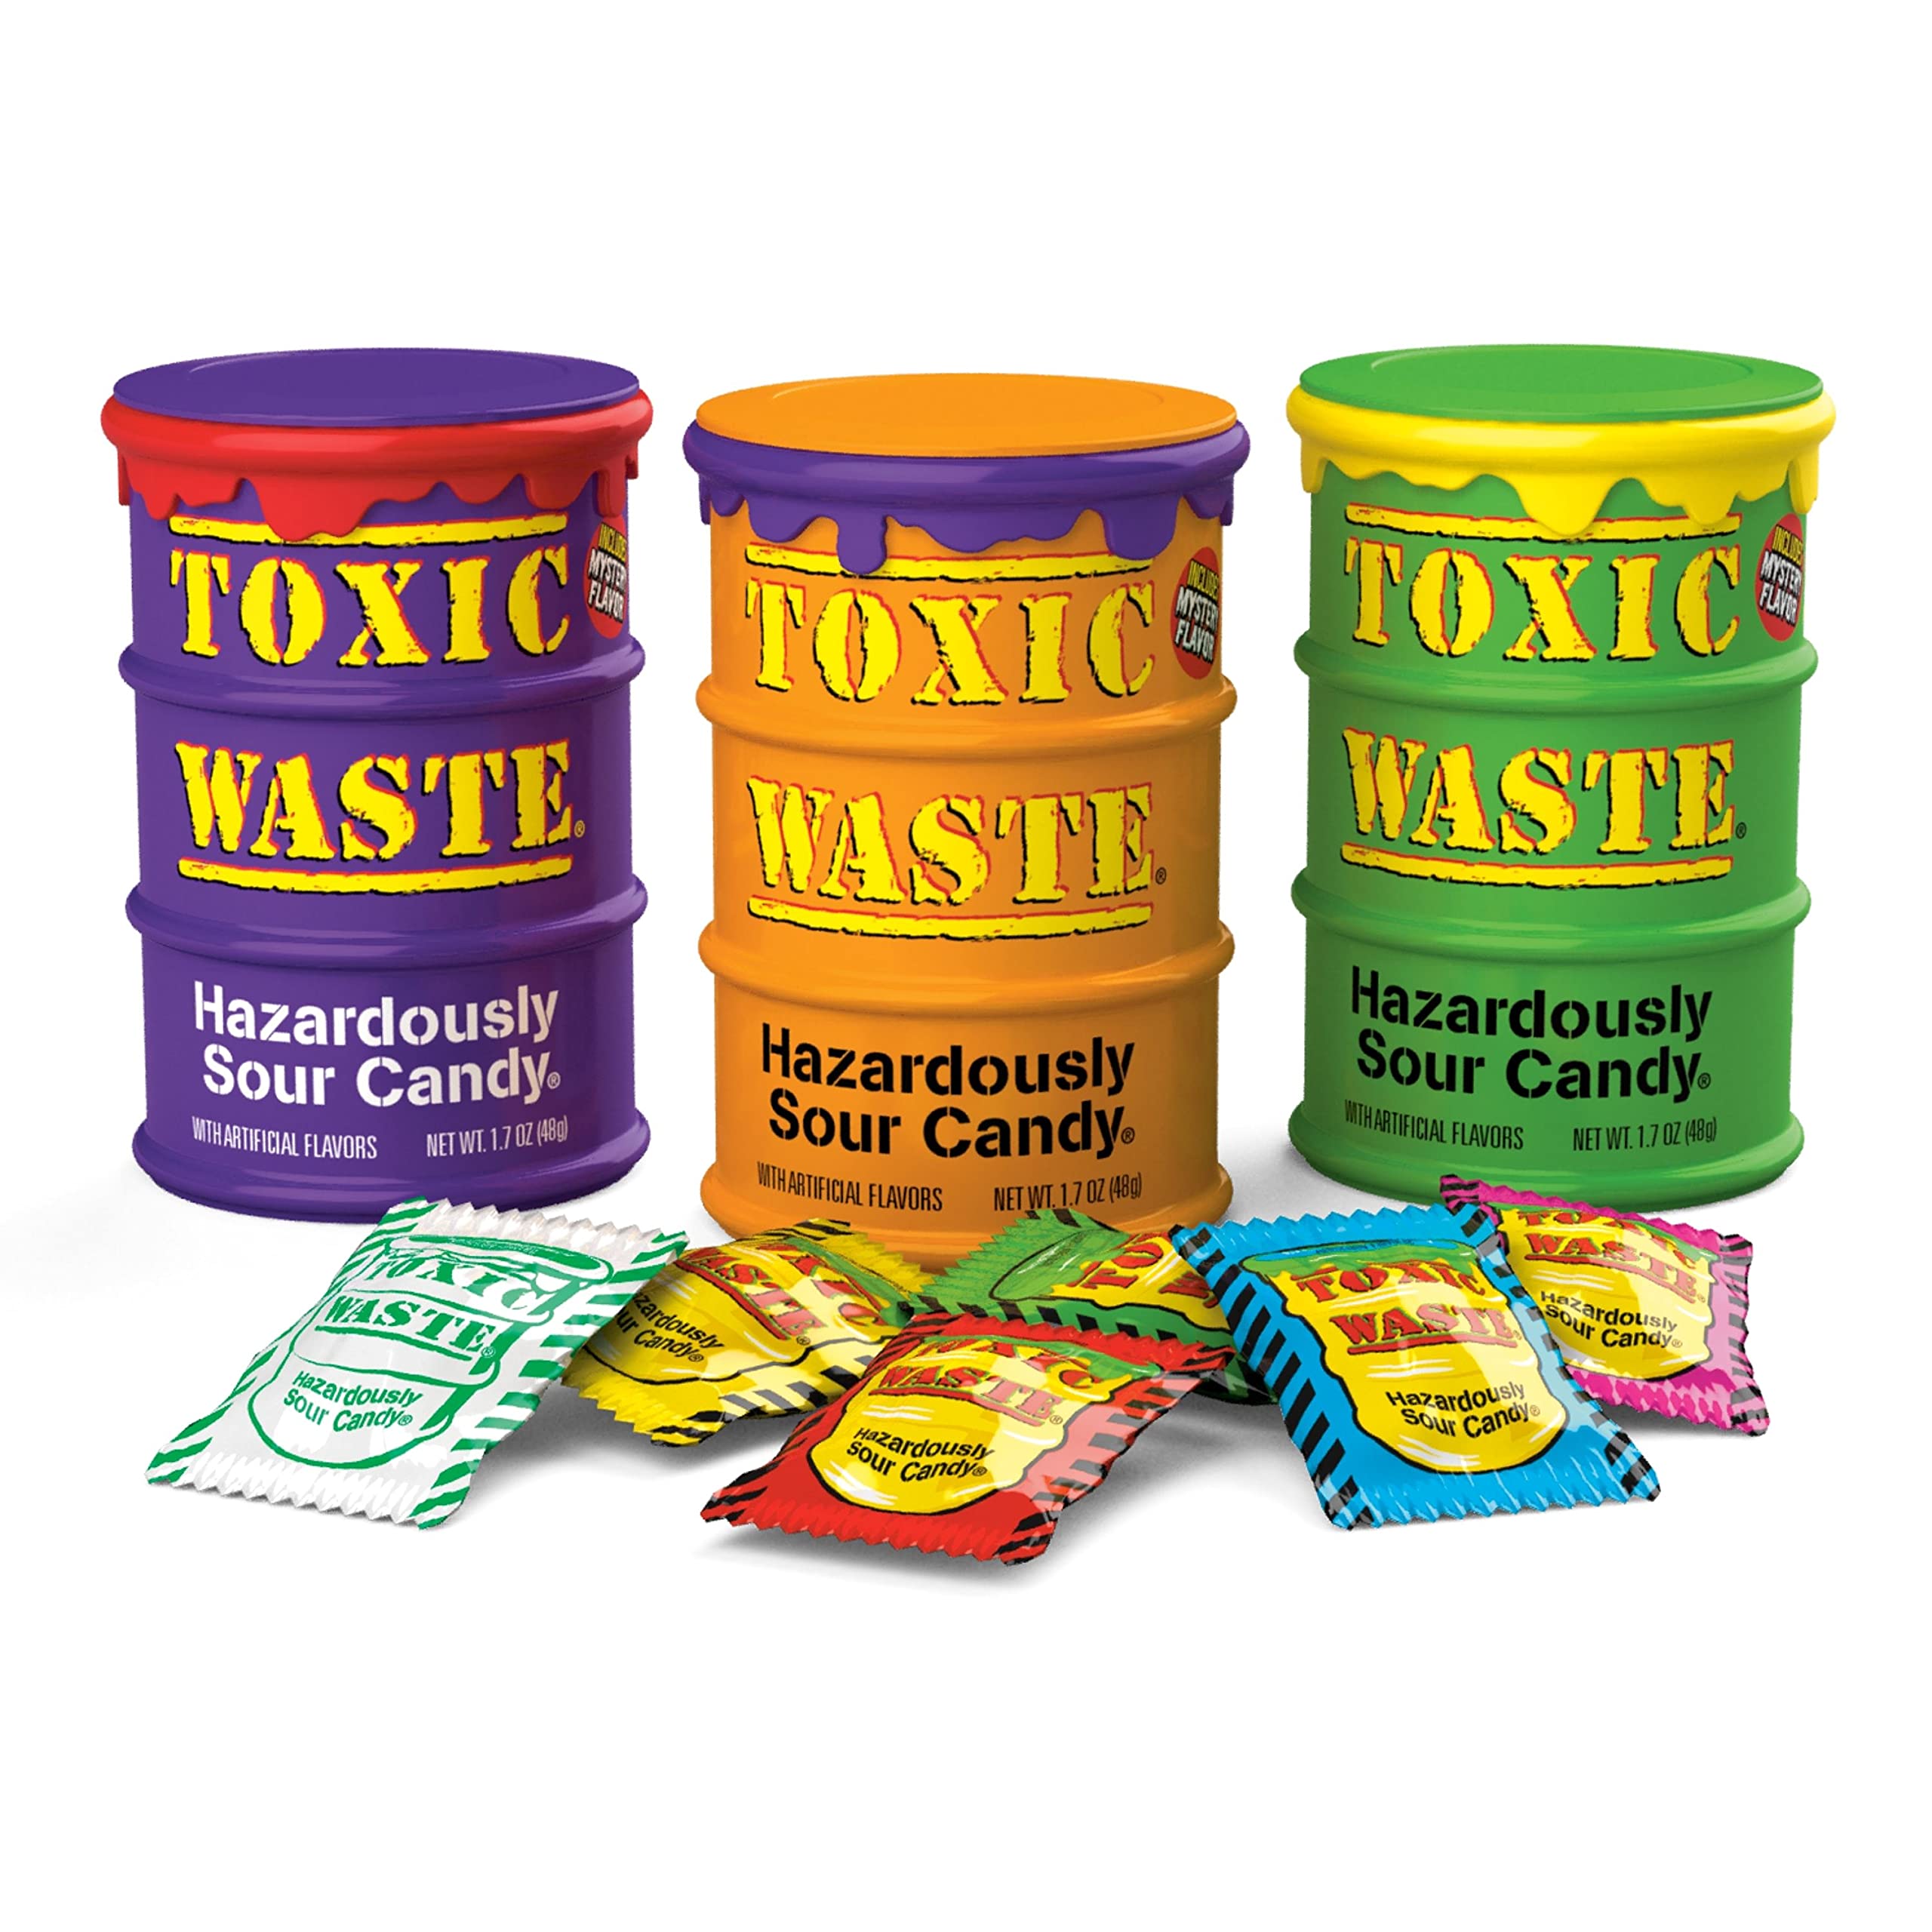 Rif_438 Toxic waste Mystery flavours